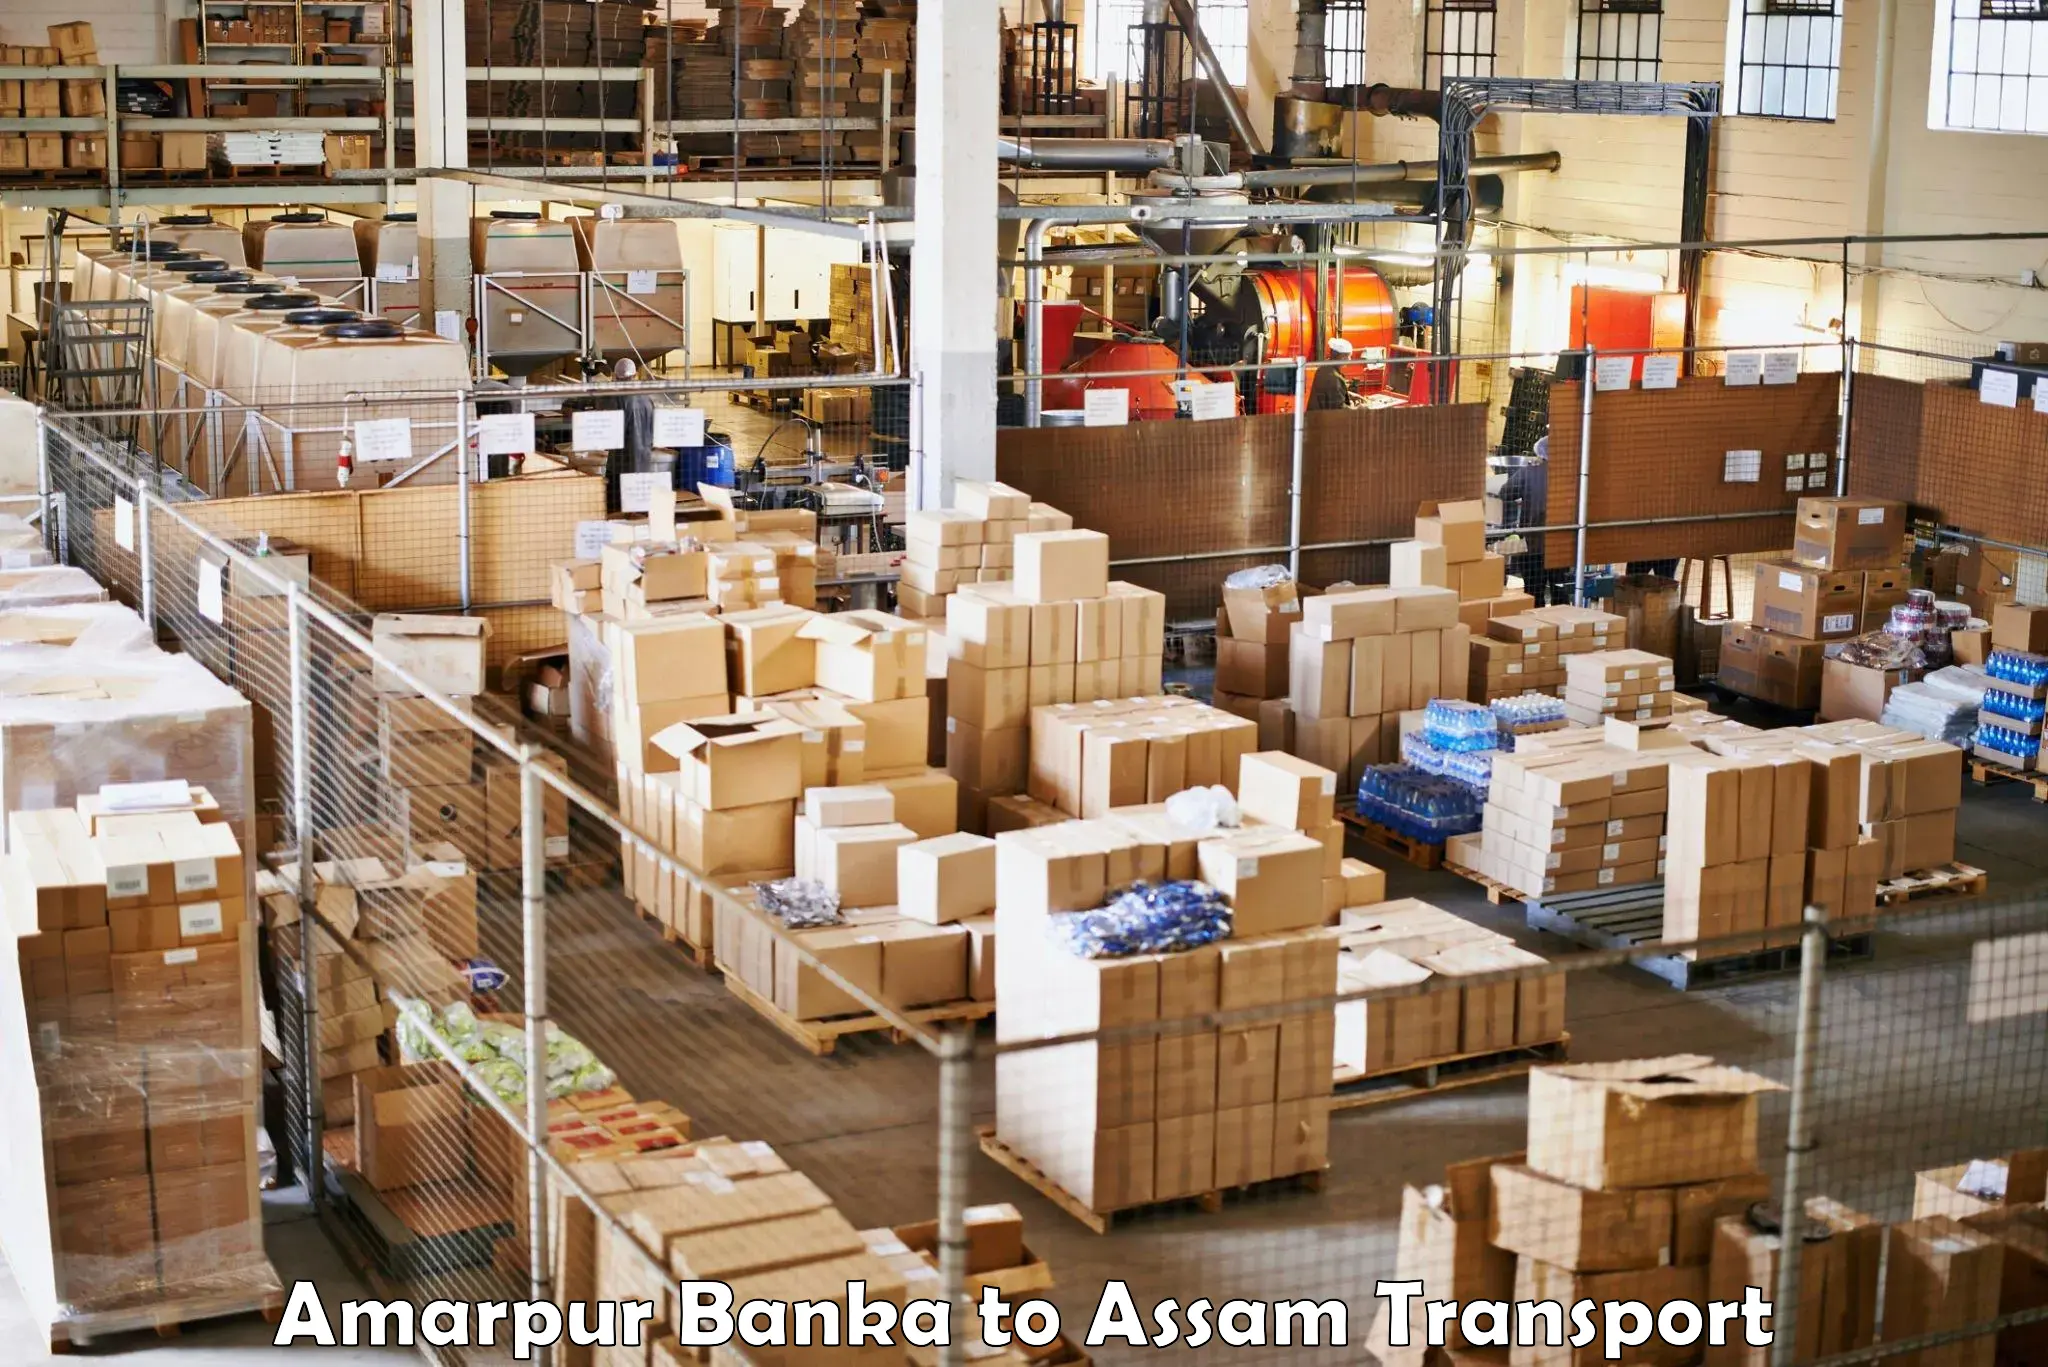 Air freight transport services Amarpur Banka to Sonitpur